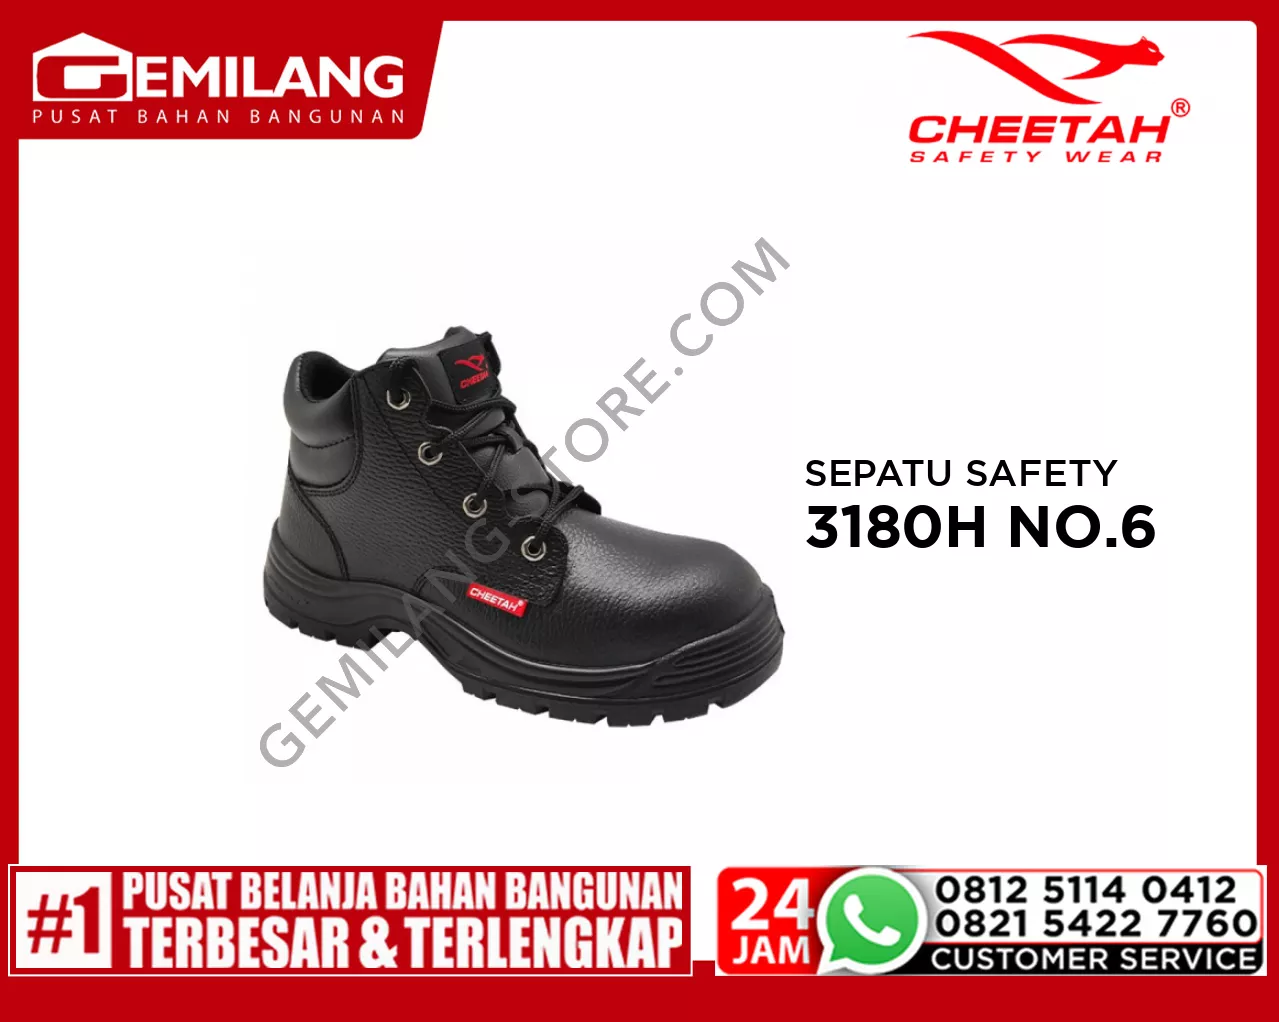 CHEETAH SEPATU SAFETY 3180H MID CUT LACE UP BOOTS NO.6